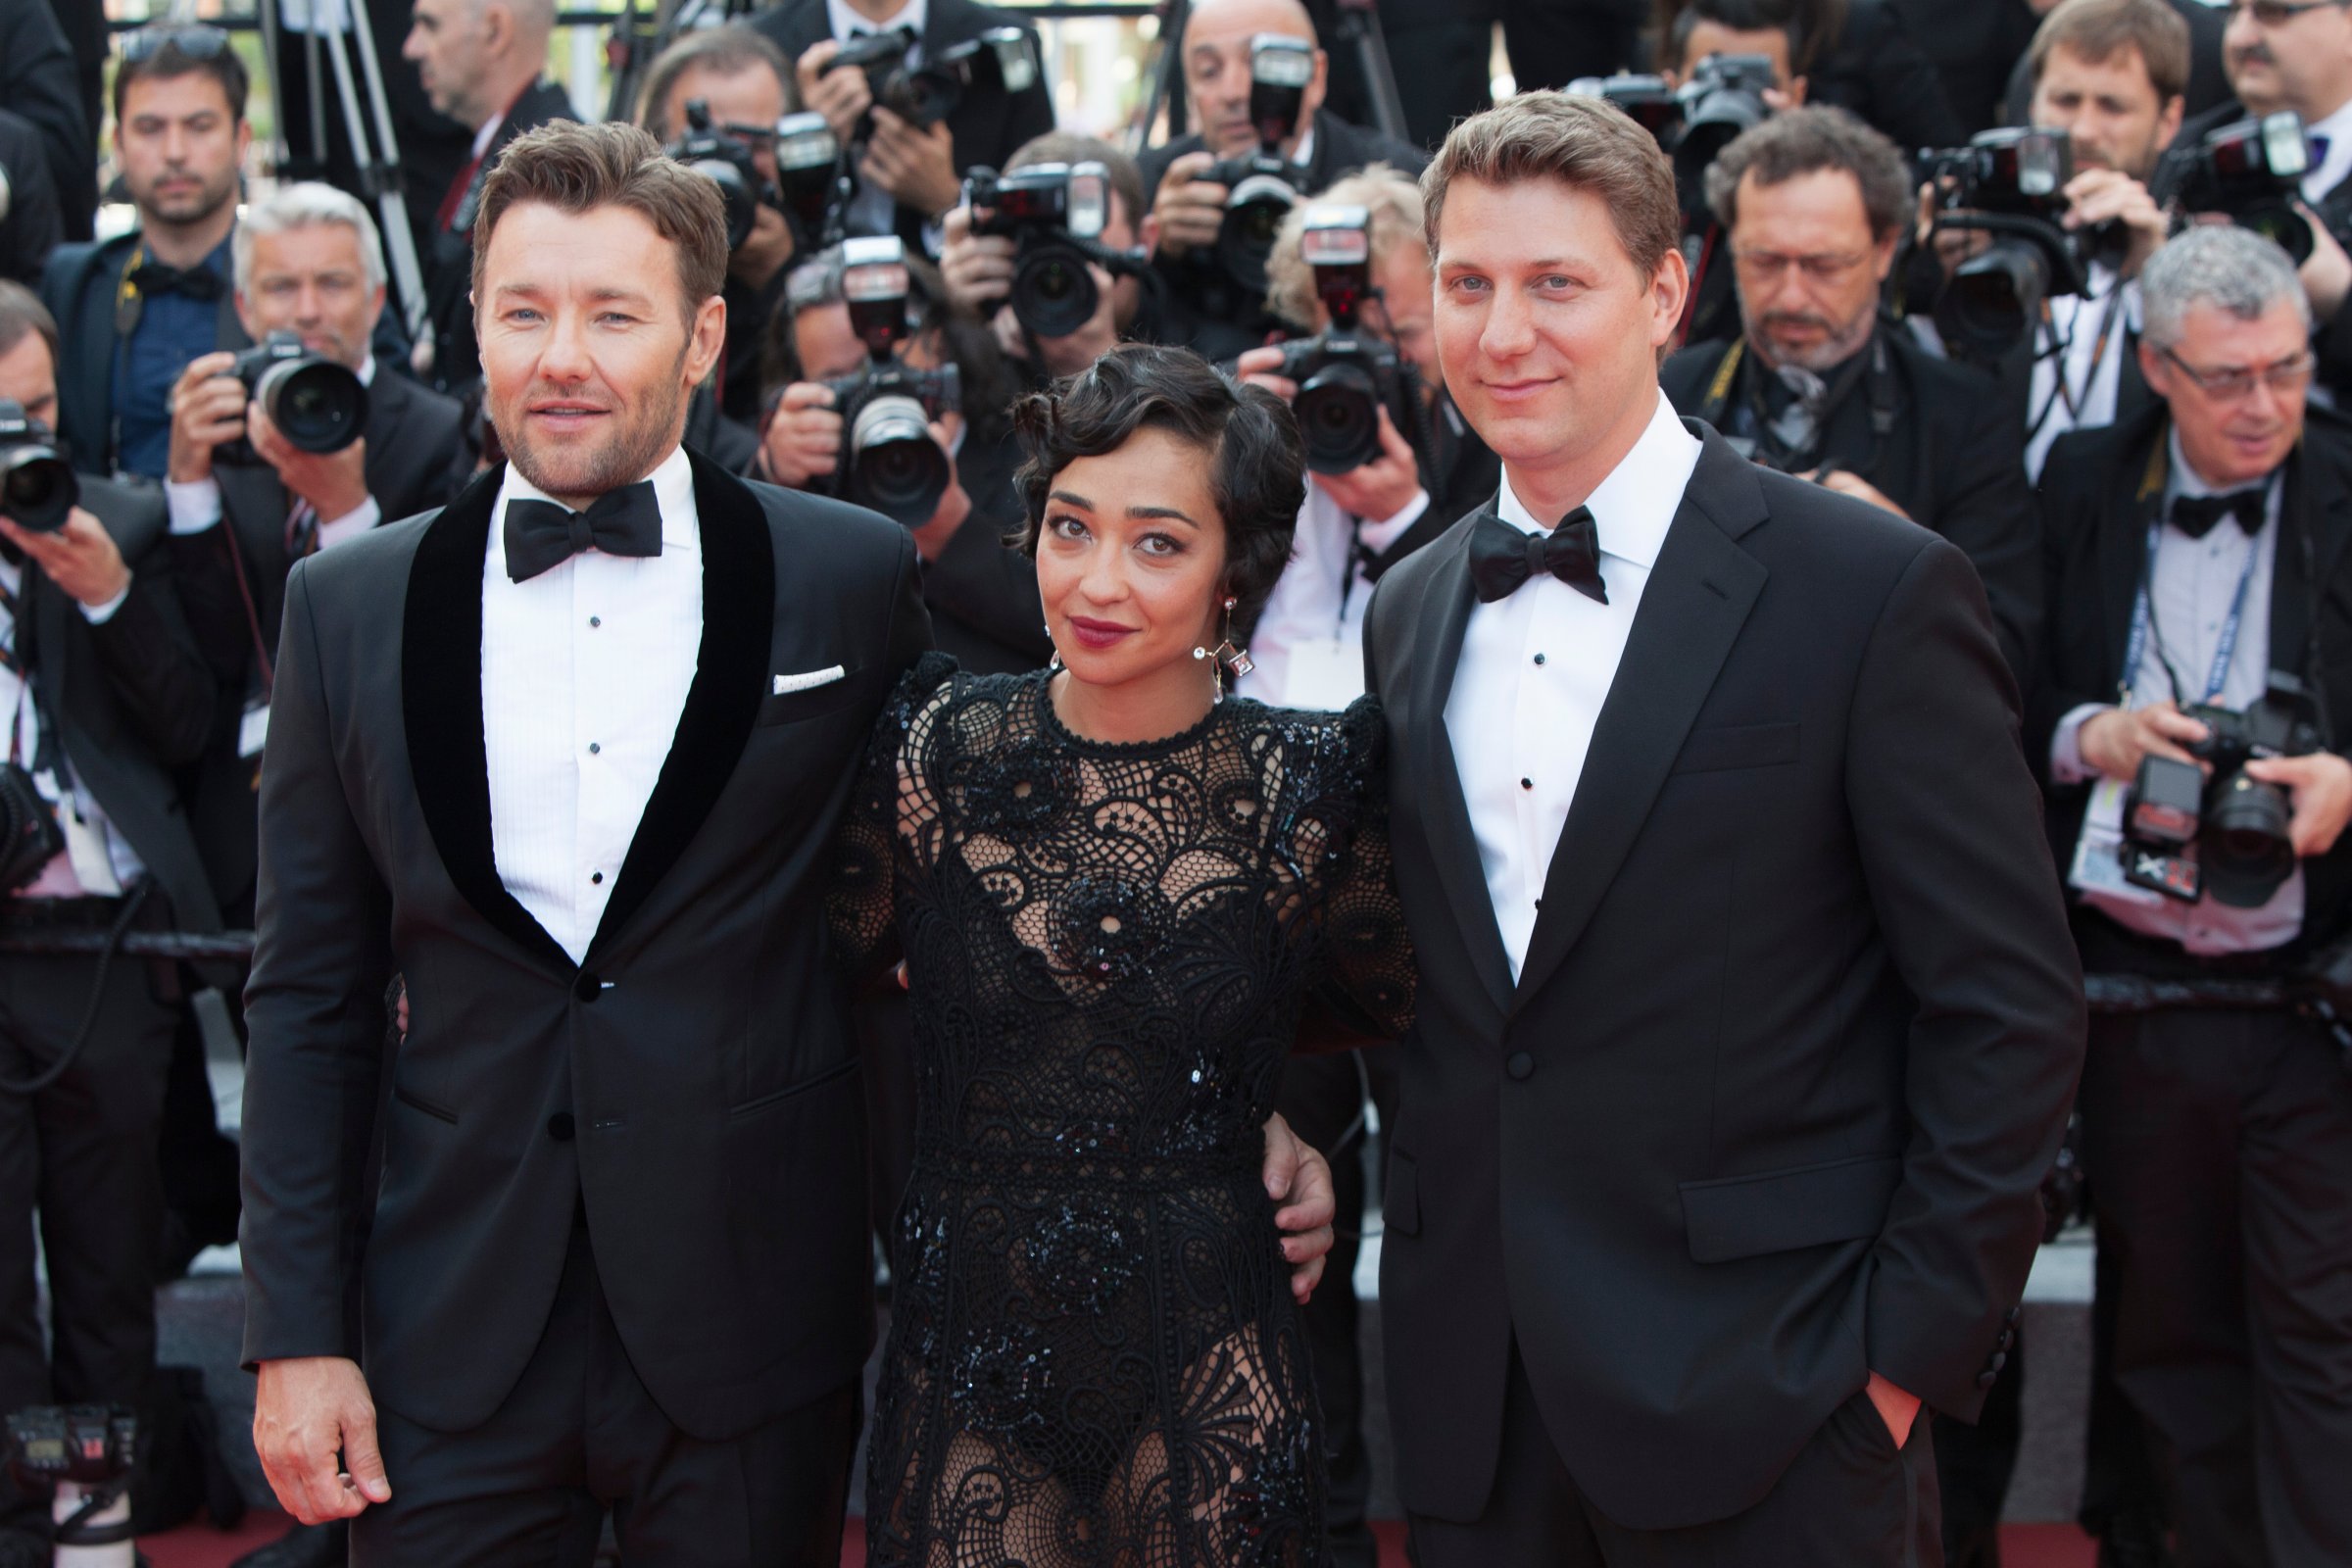 From left: Joel Edgerton, Ruth Negga, and director Jeff Nichols during the 69th annual Cannes Film Festival at the Palais des Festivals on May 16, 2016 in Cannes, France.